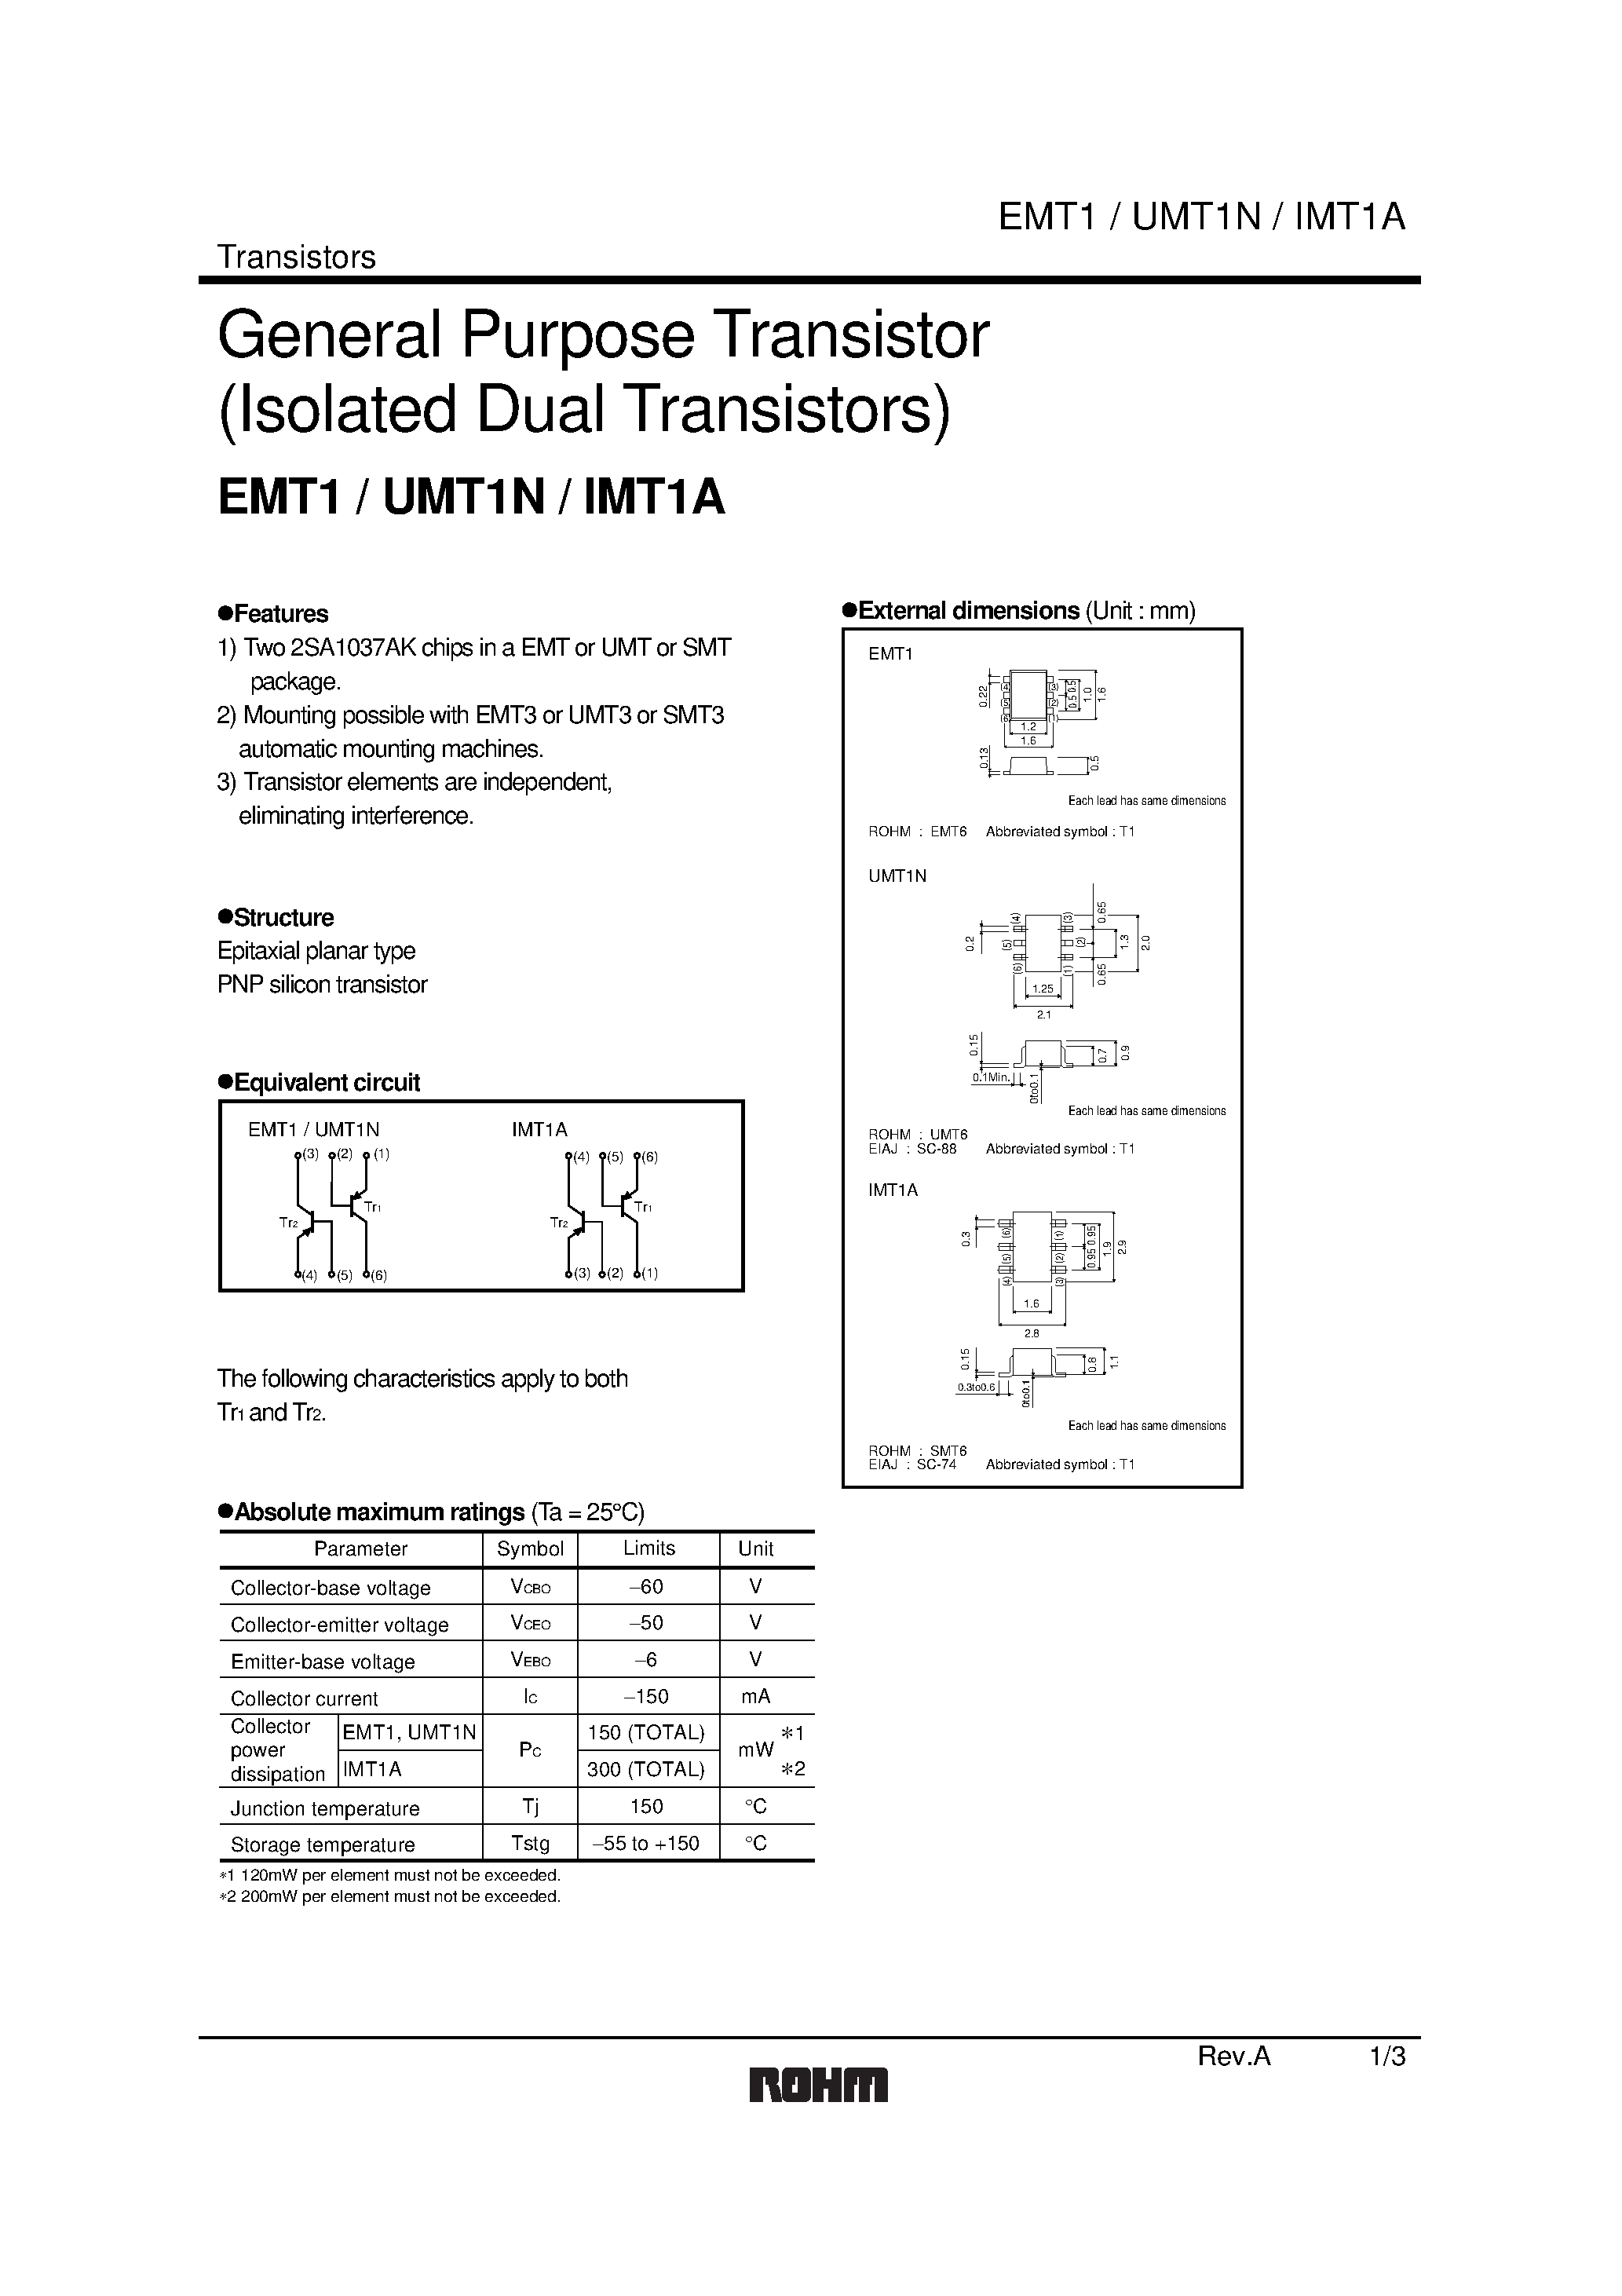 Даташит IMT1A - General Purpose Transistor (Isolated Dual Transistors) страница 1